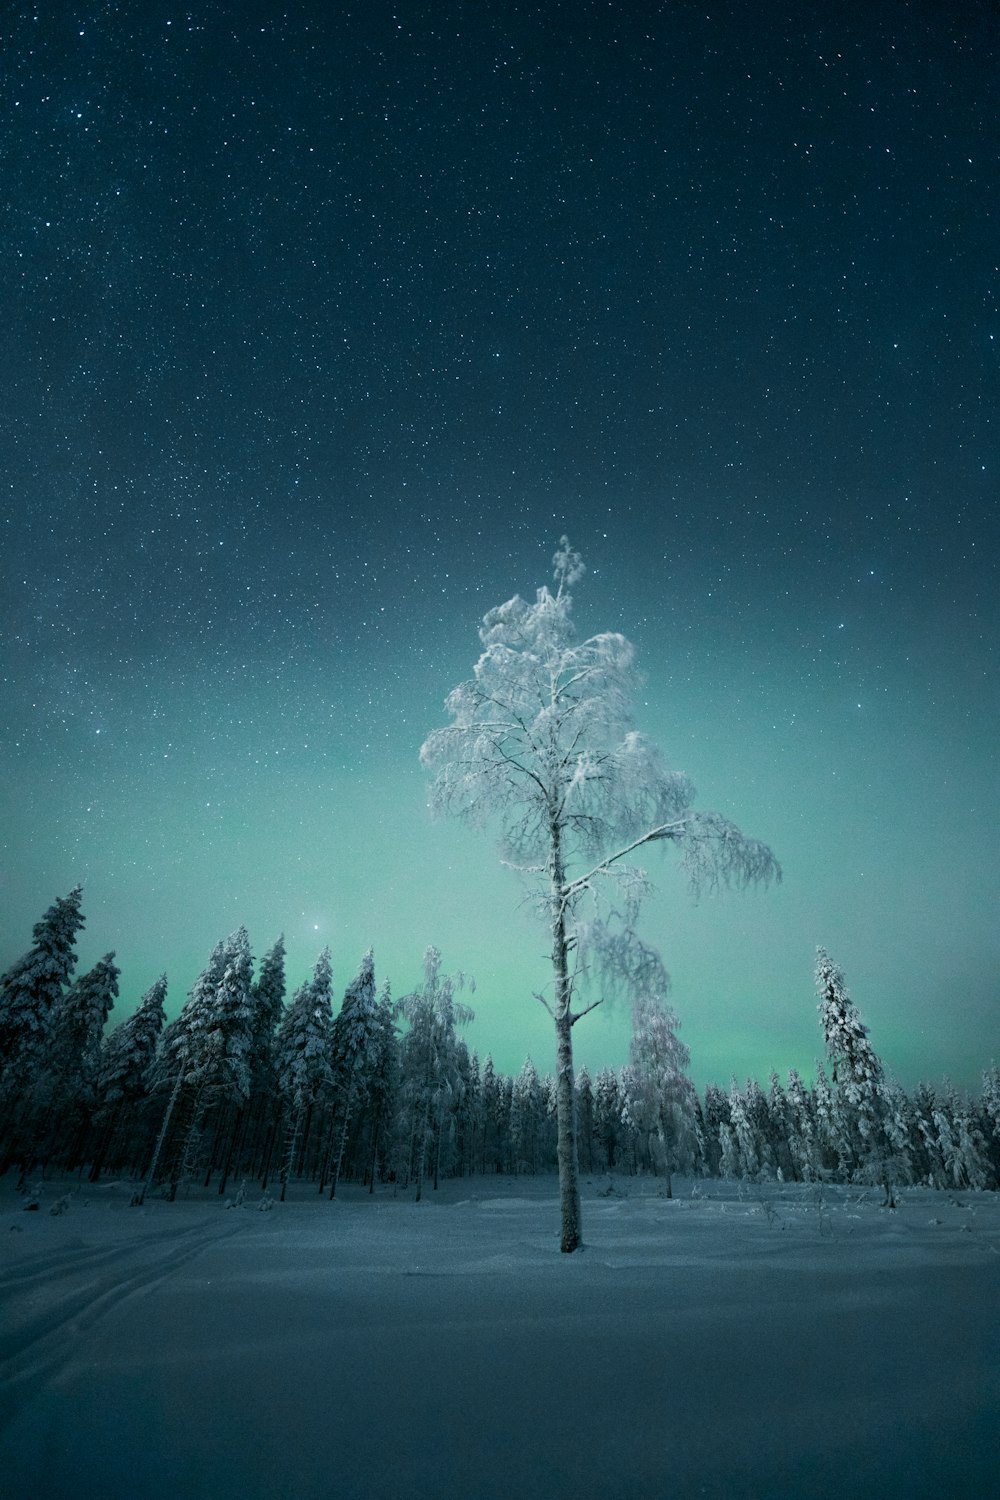 regional for mig jungle Best Snow Night Pictures [HD] | Download Free Images on Unsplash